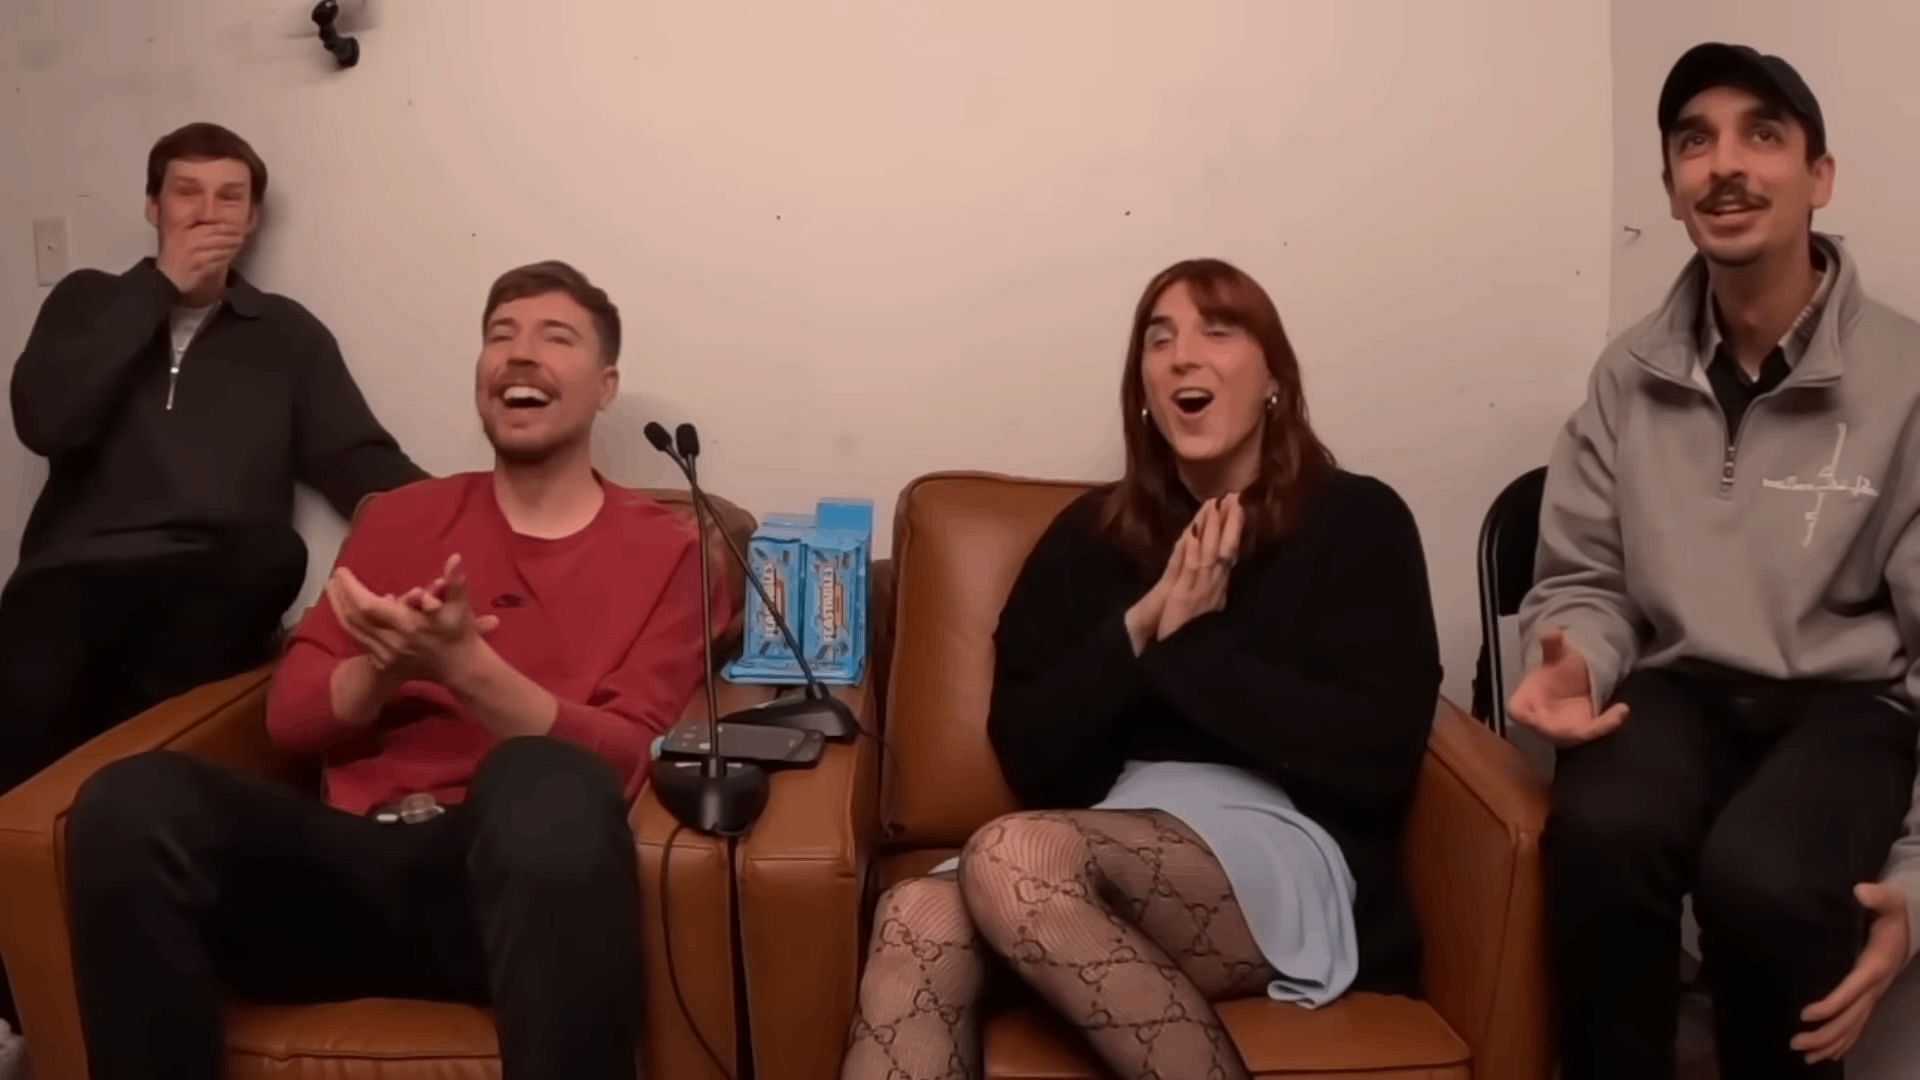 MrBeast uses a lie detector on his friends in the latest video on his second channel (Image via MrBeast 2/YouTube)